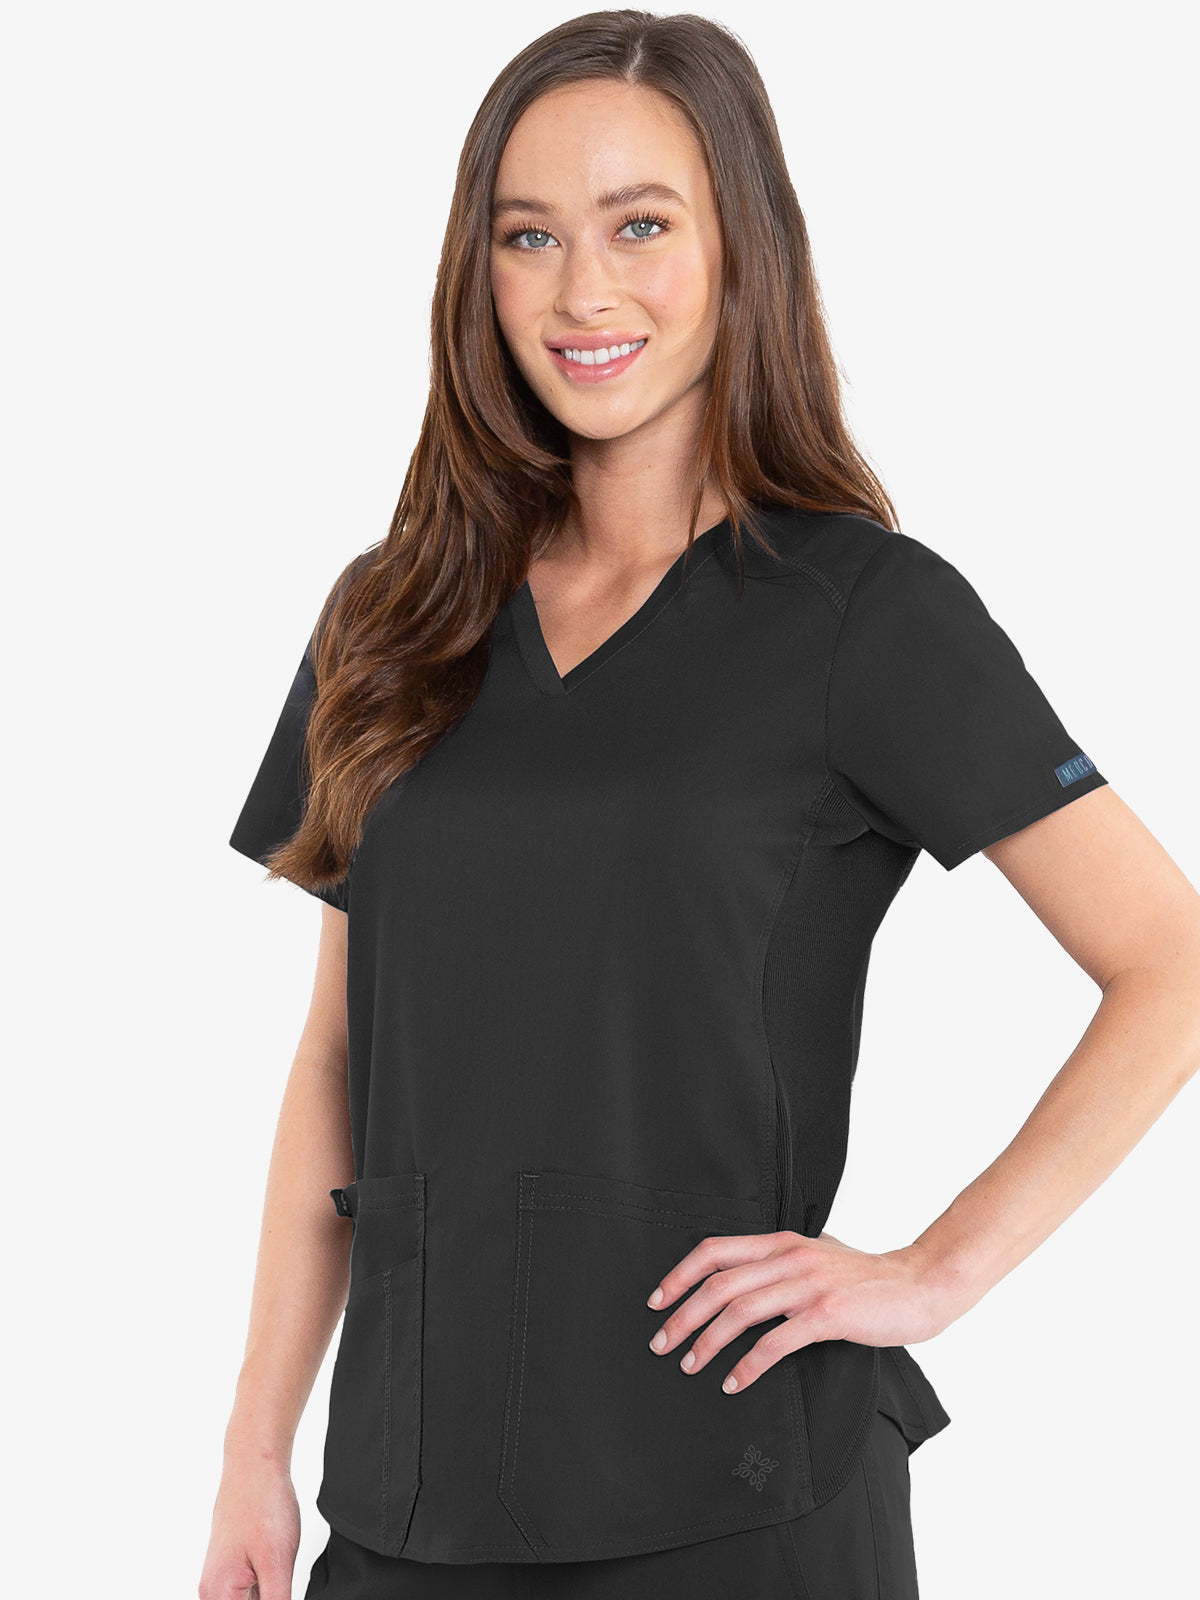 Med Couture Touch 7459 Women's V-Neck Shirttail Top Black Front